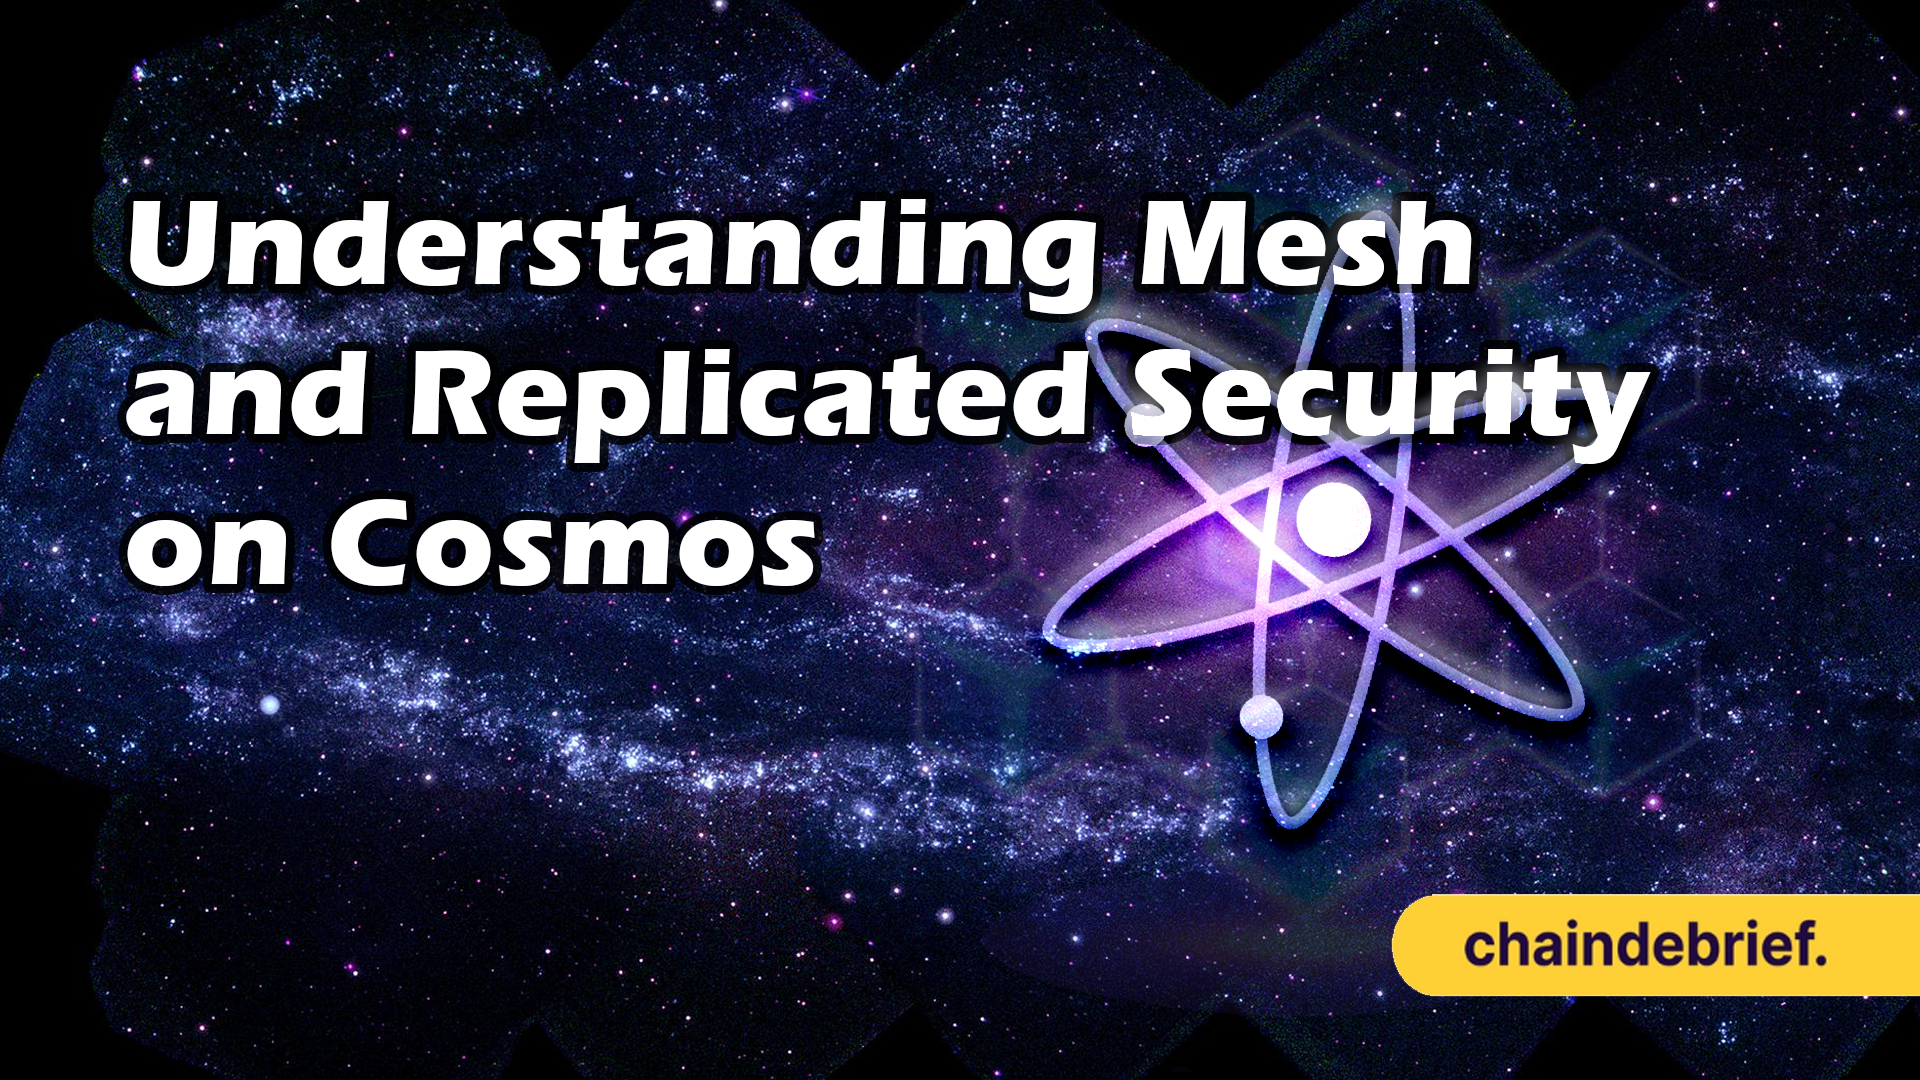 Cosmos Replicated and Mesh security